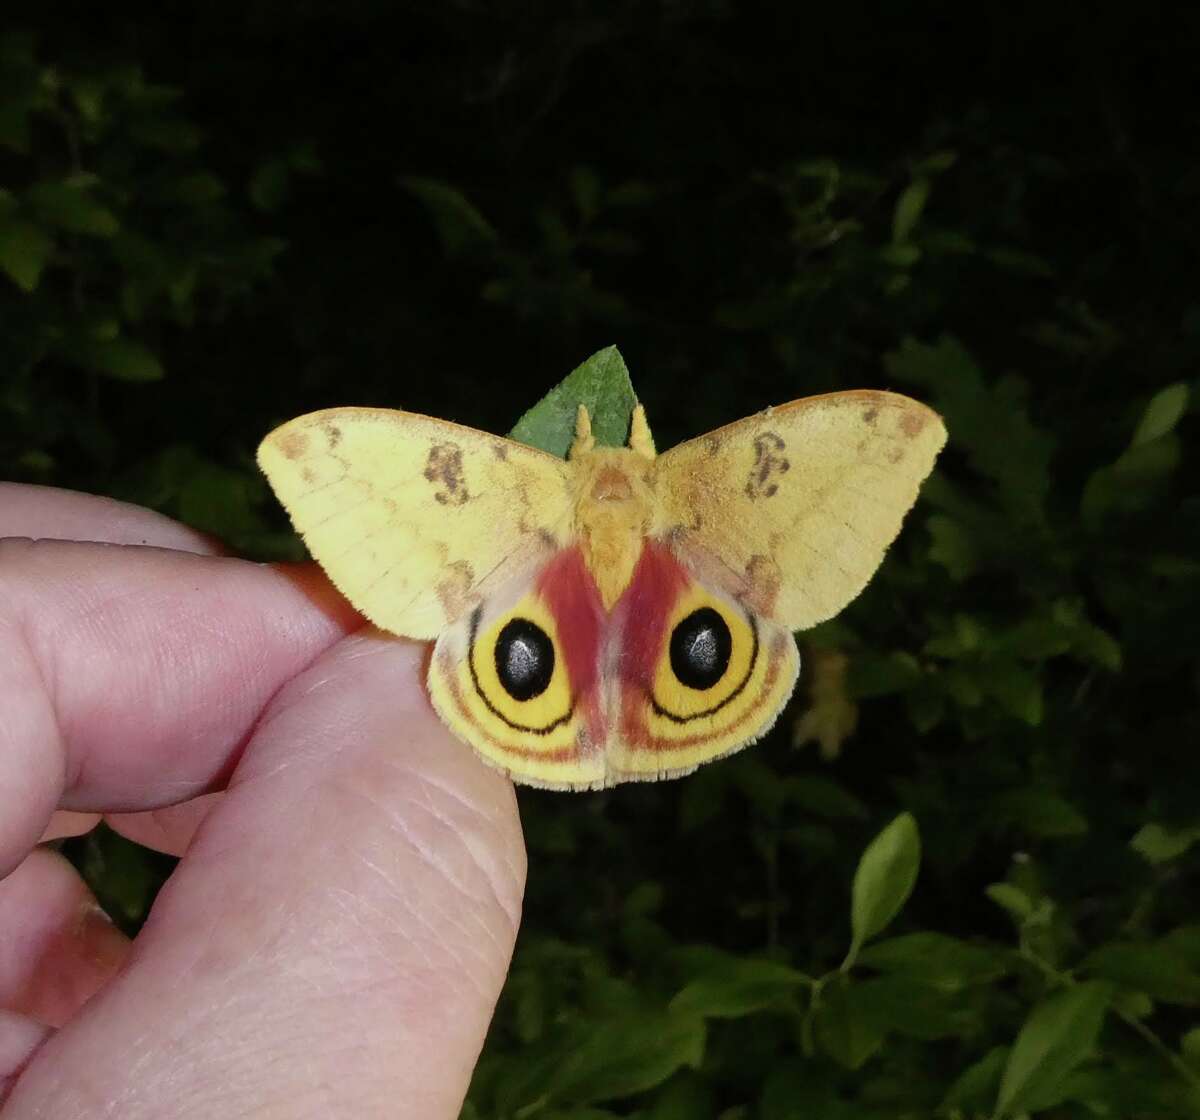 National Moth Week, held the last week of July, celebrates the creatures that are part of the Lepidoptera family and that experts say are understudied.